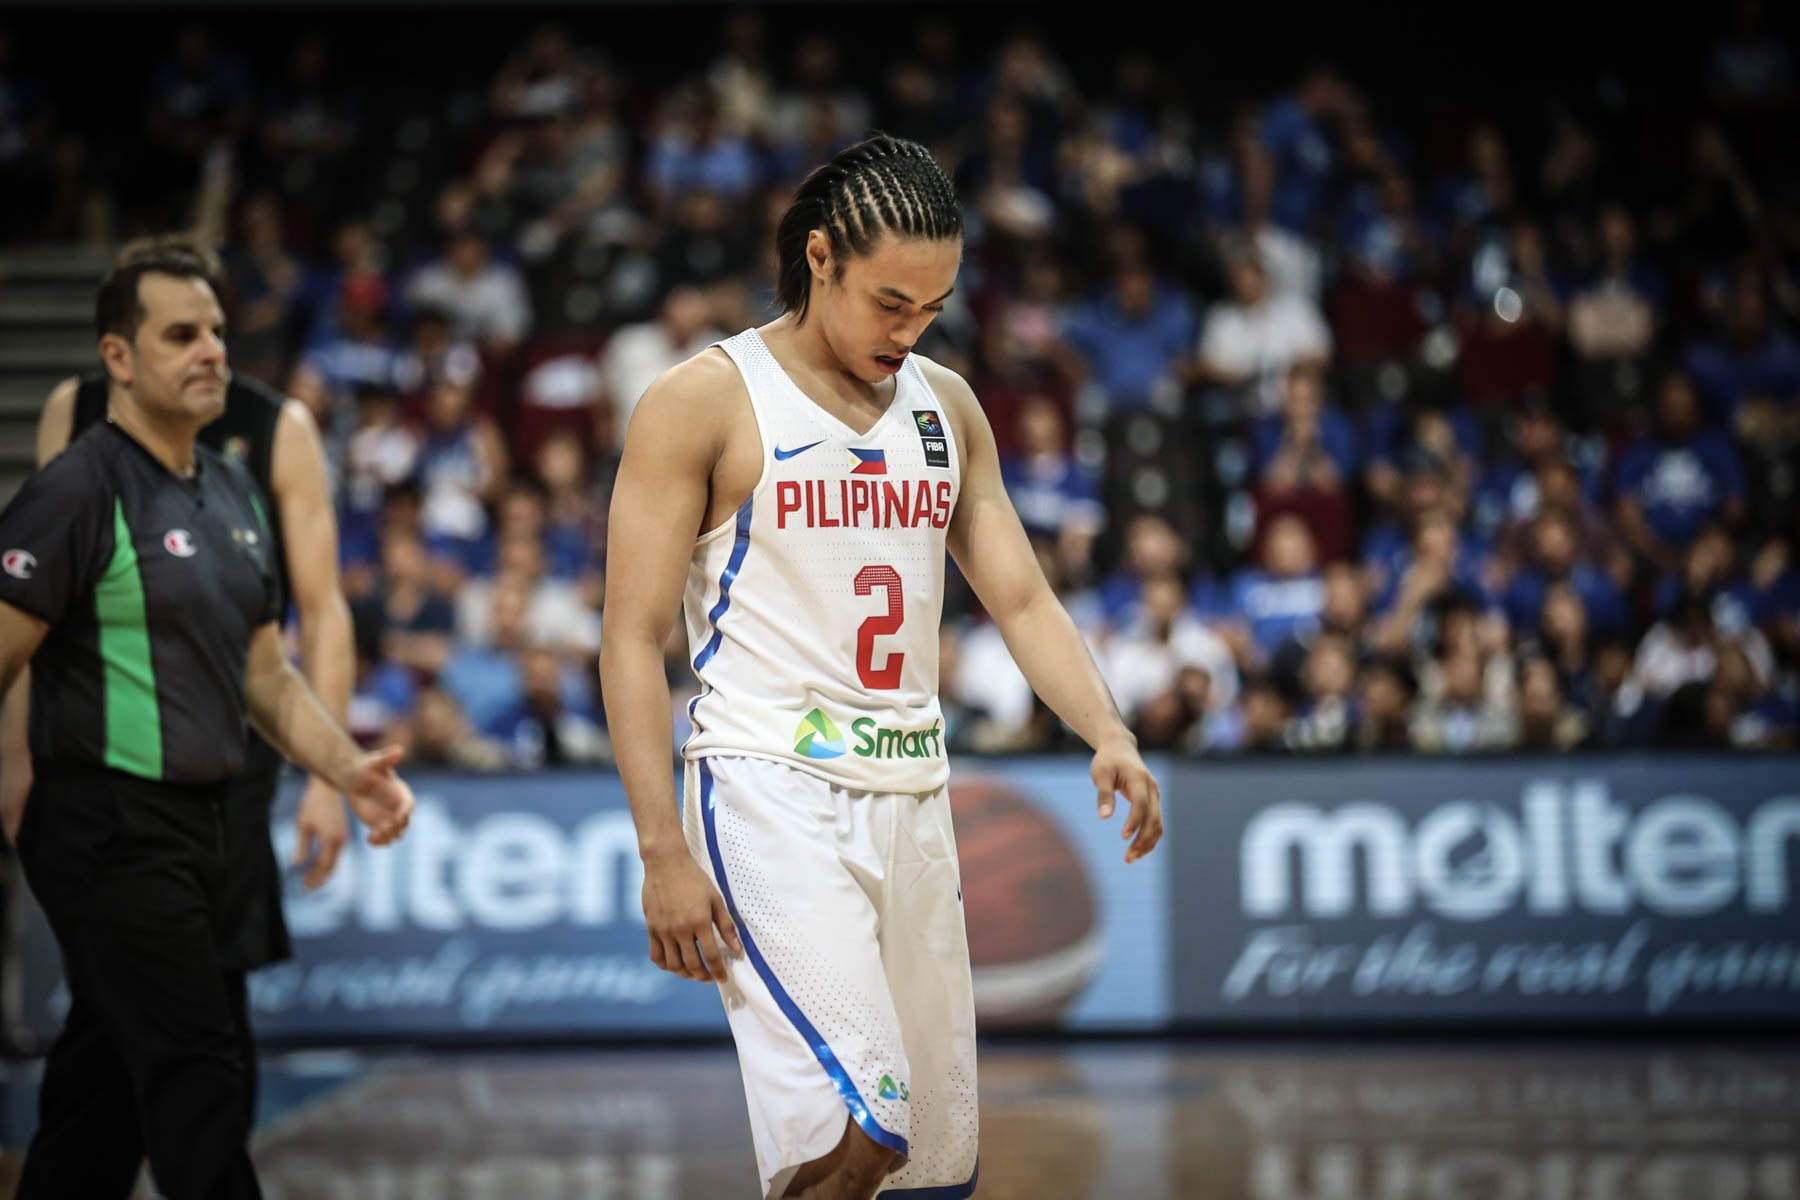 Romeo to Gilas doubters: Just be proud of our sacrifices